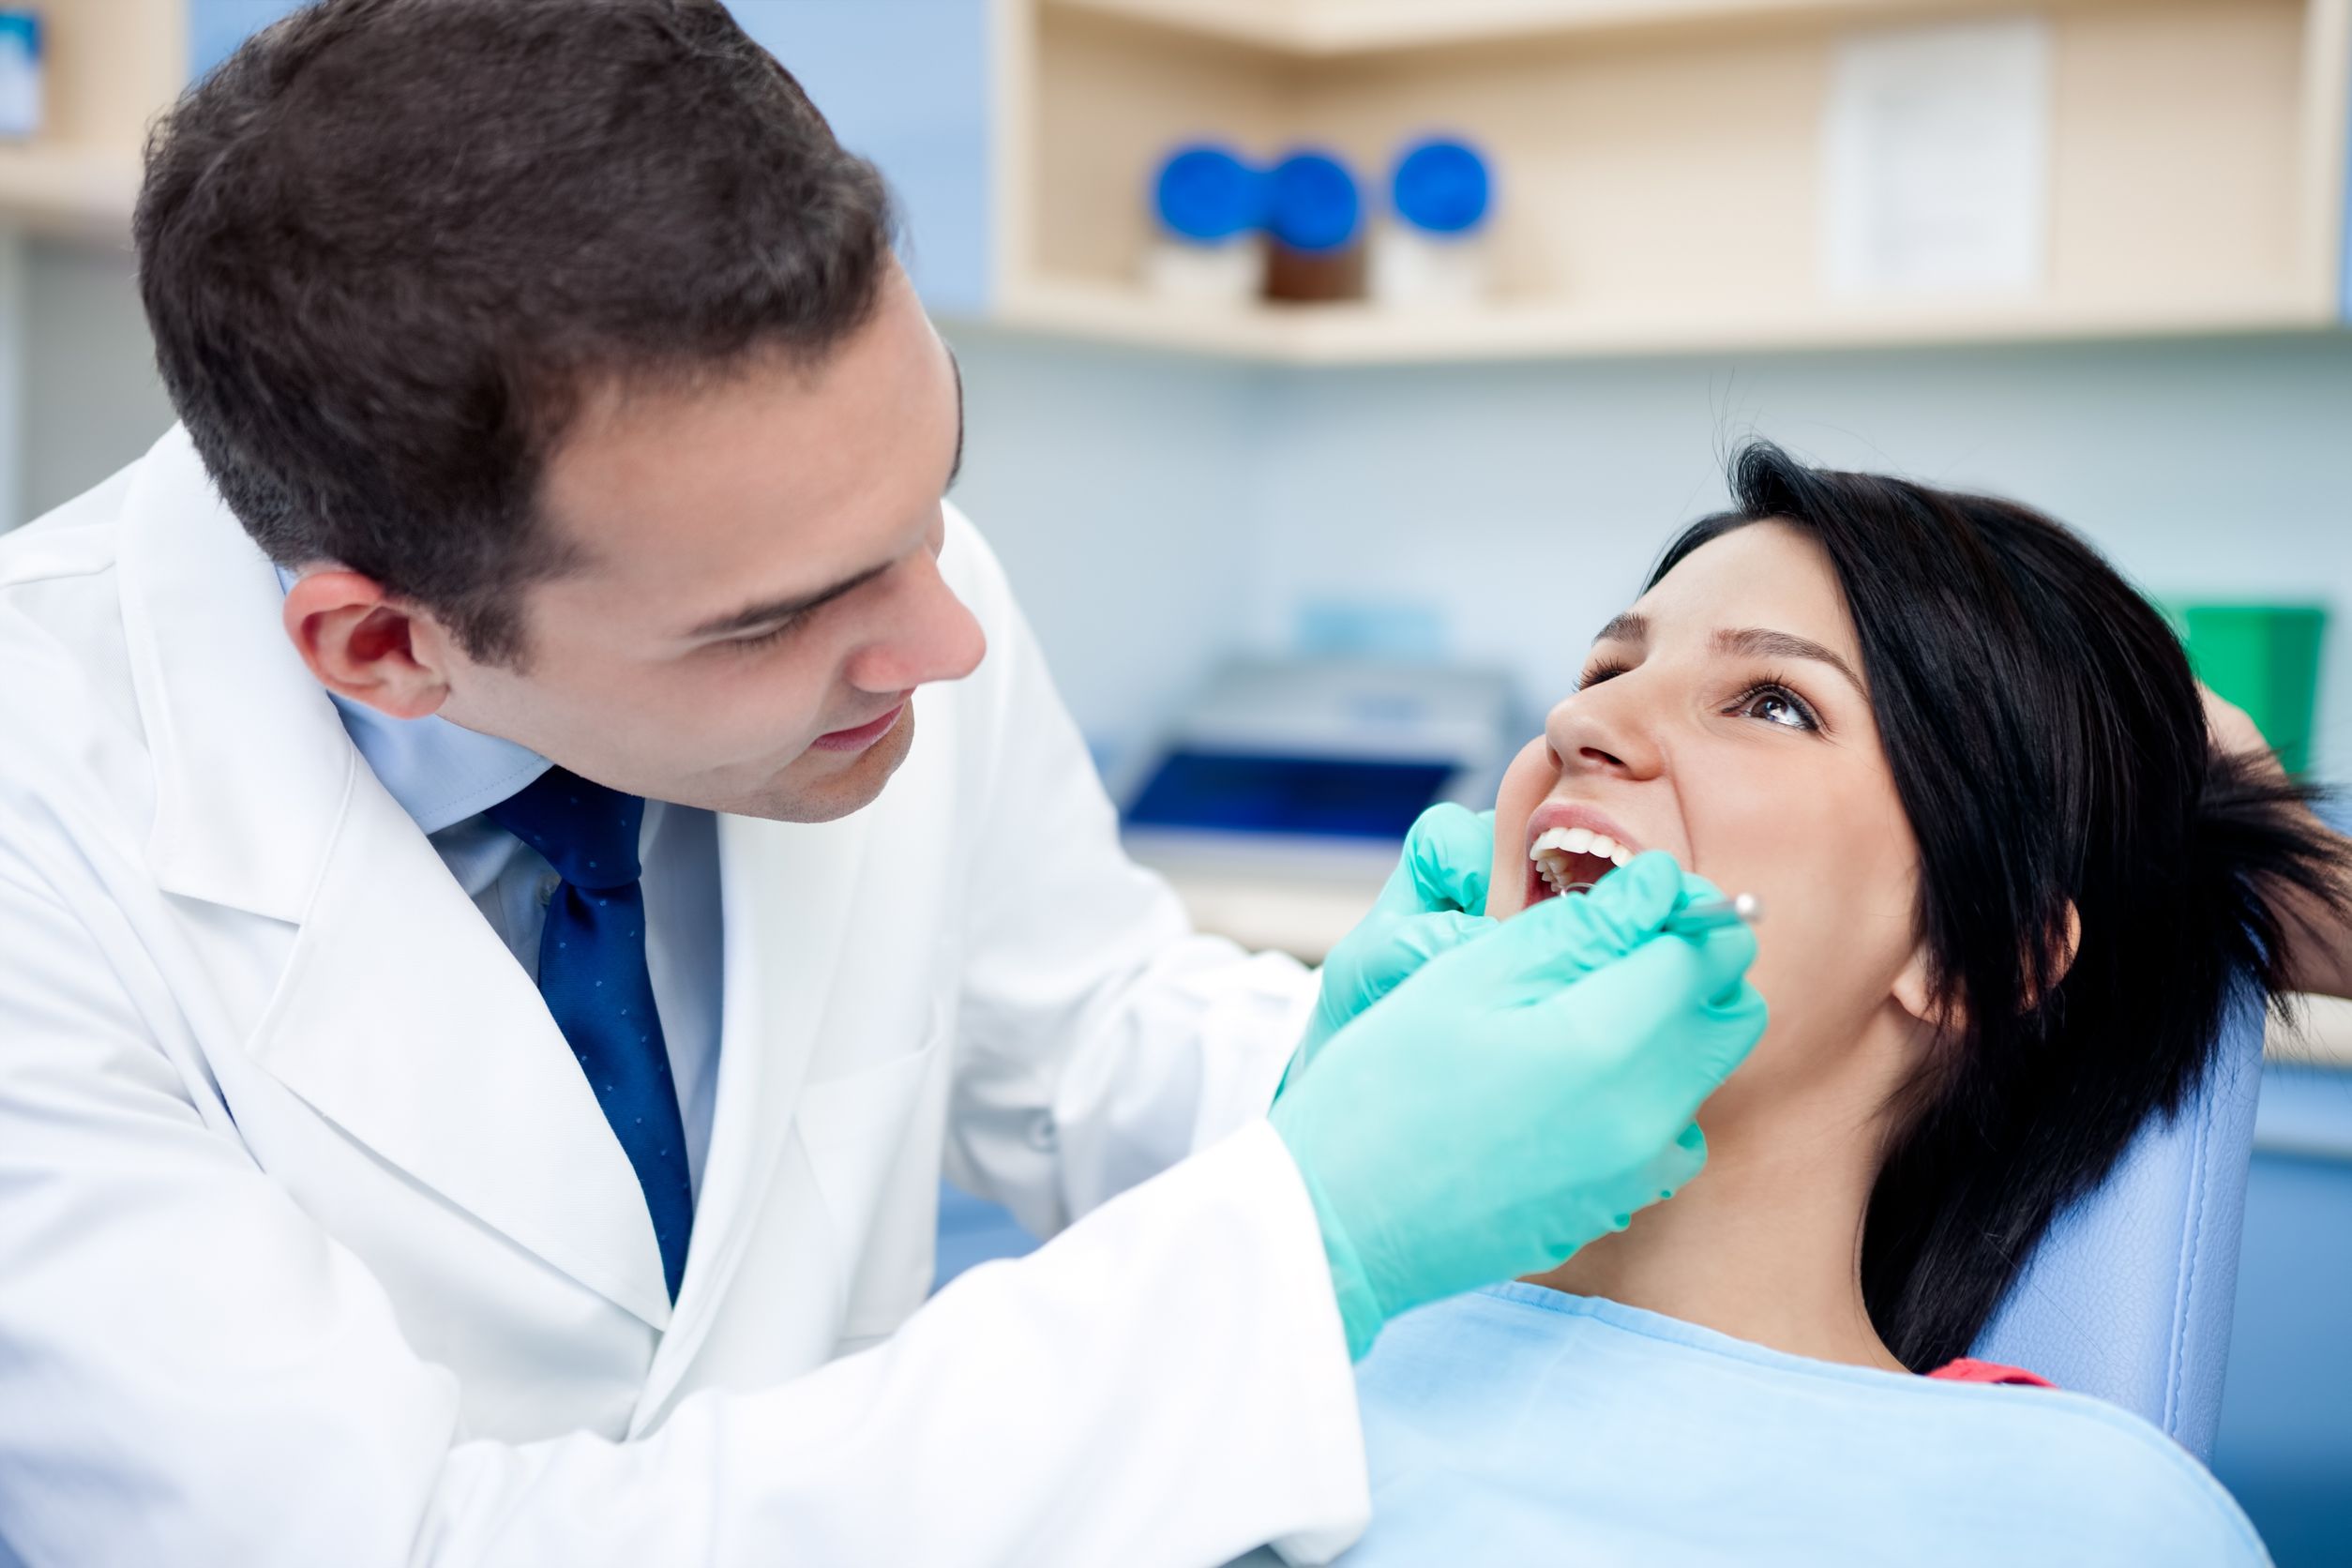 Factors to Consider When Looking for Dental Implants Treatment in Huntington Beach, CA